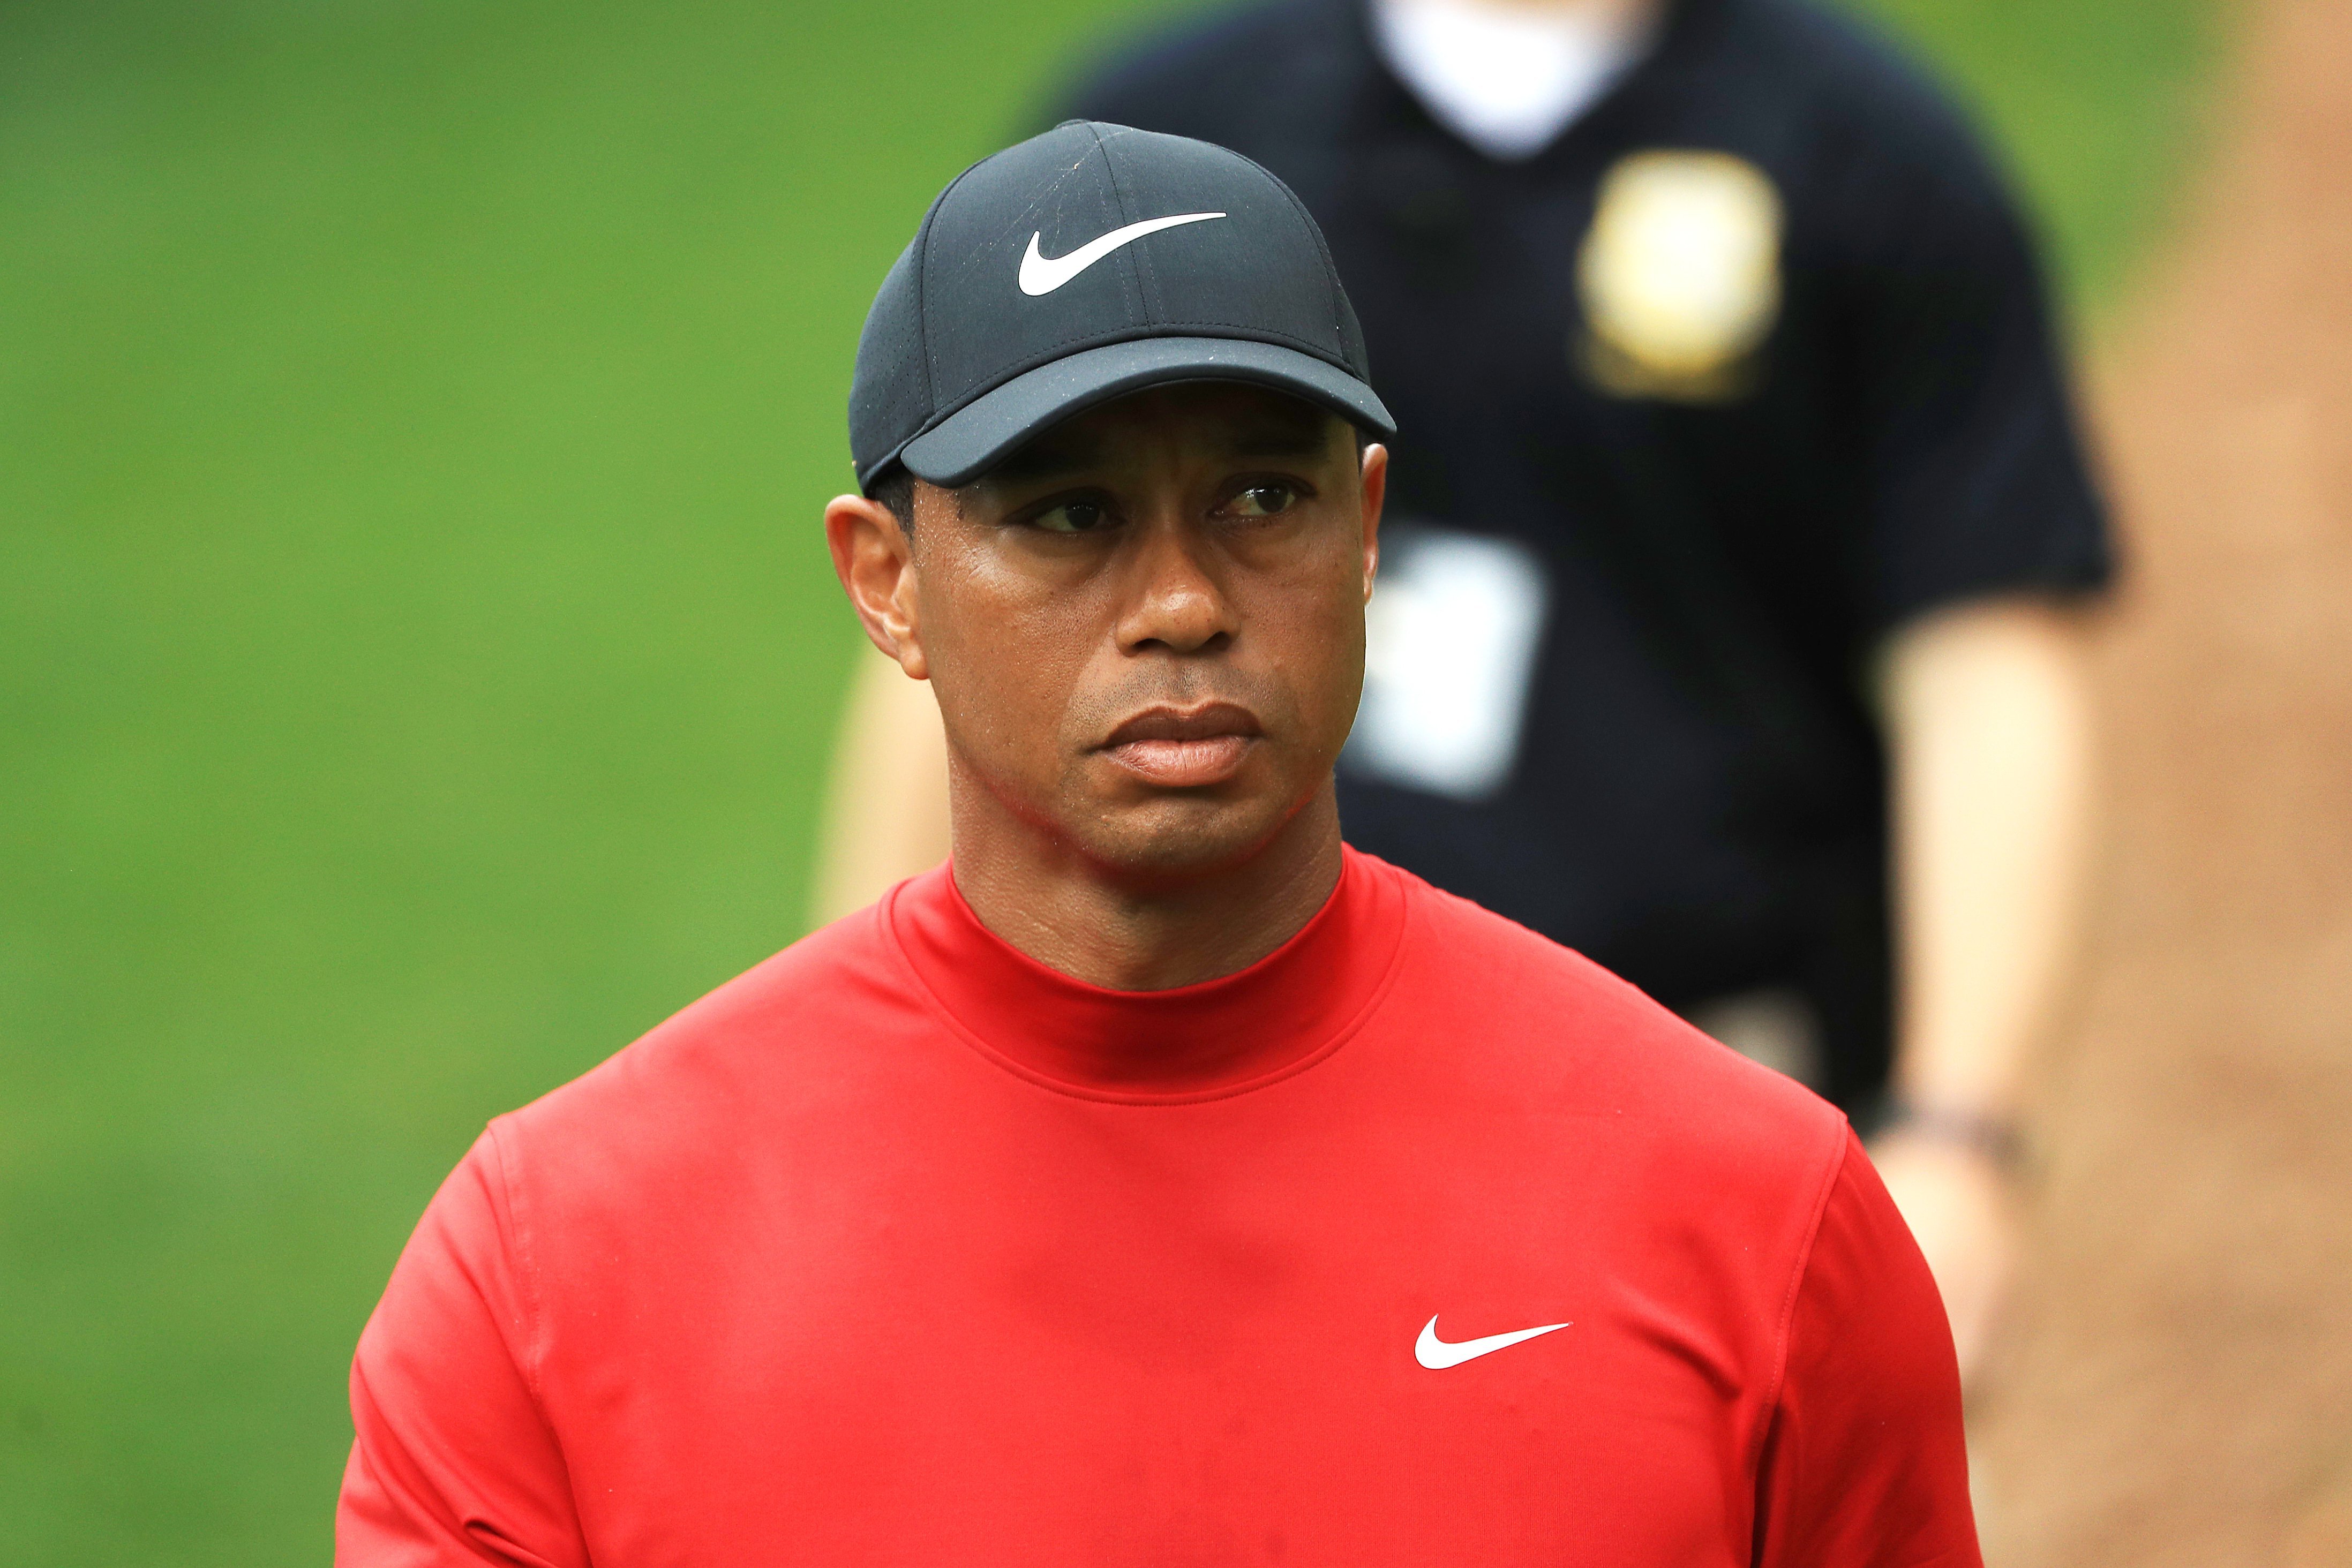 Tiger Woods of the United States walks the sixth hole during the final round of the Masters at Augusta National Golf Club on April 14, 2019. | Photo: GettyImages